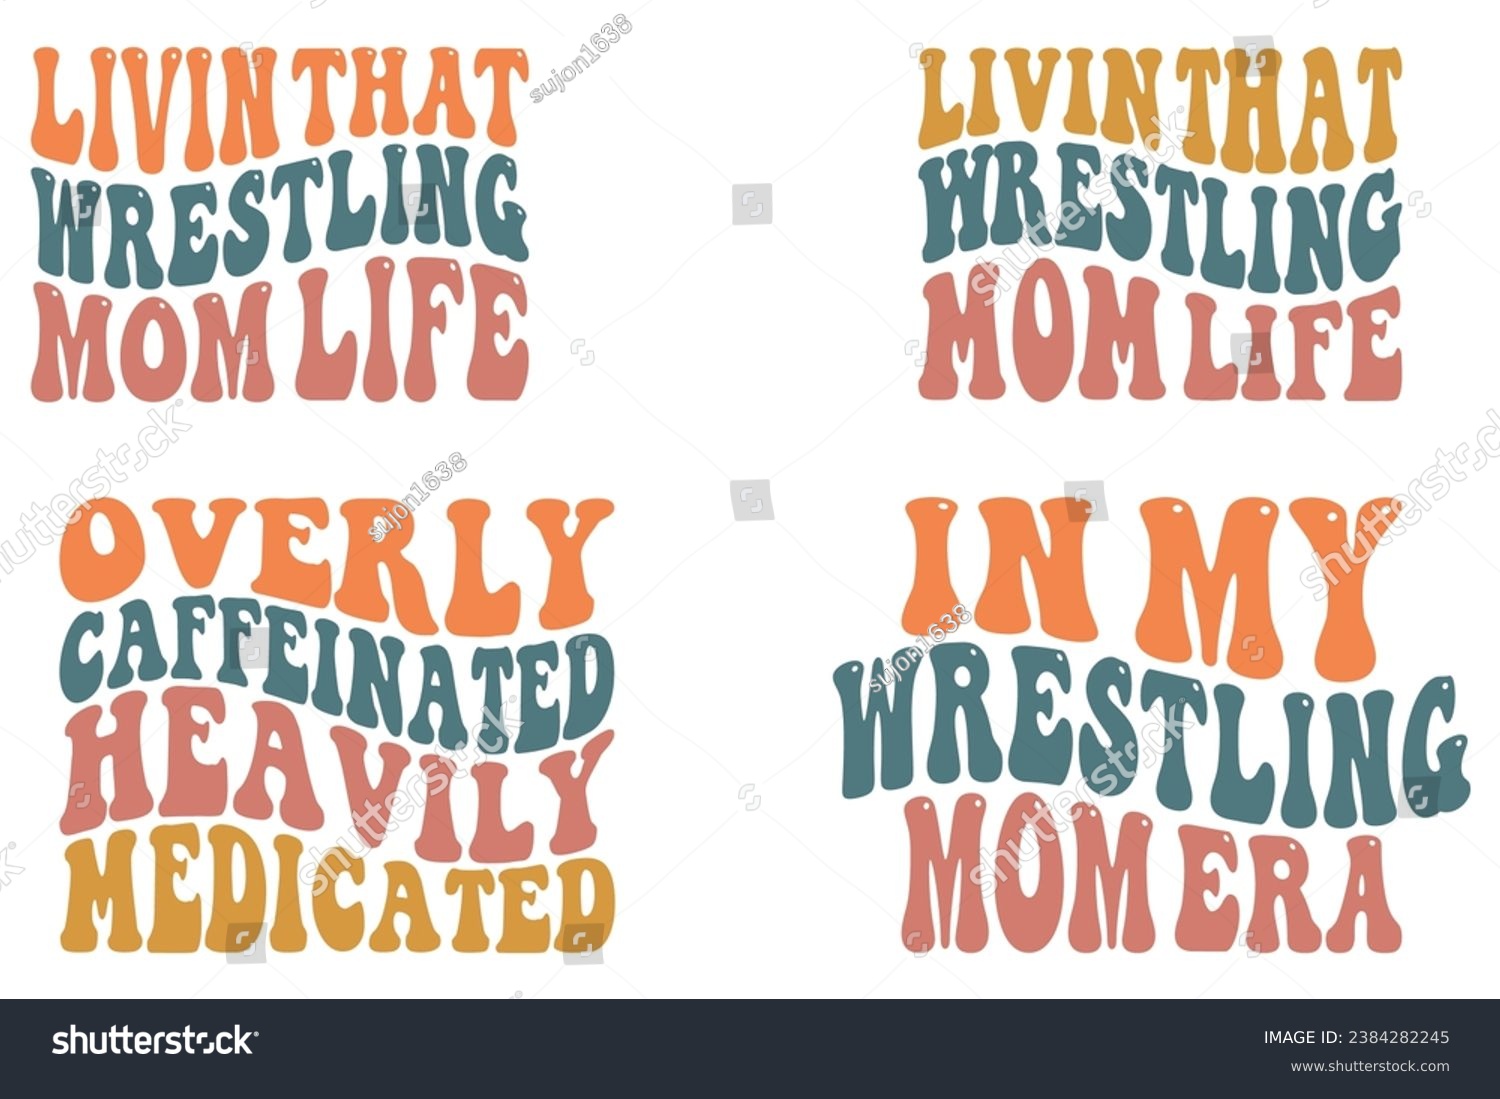 SVG of Living That Wrestling Mom Life, Overly Caffeinated Heavily Medicated, In My Wrestling Mom Era retro wavy T-shirt designs svg